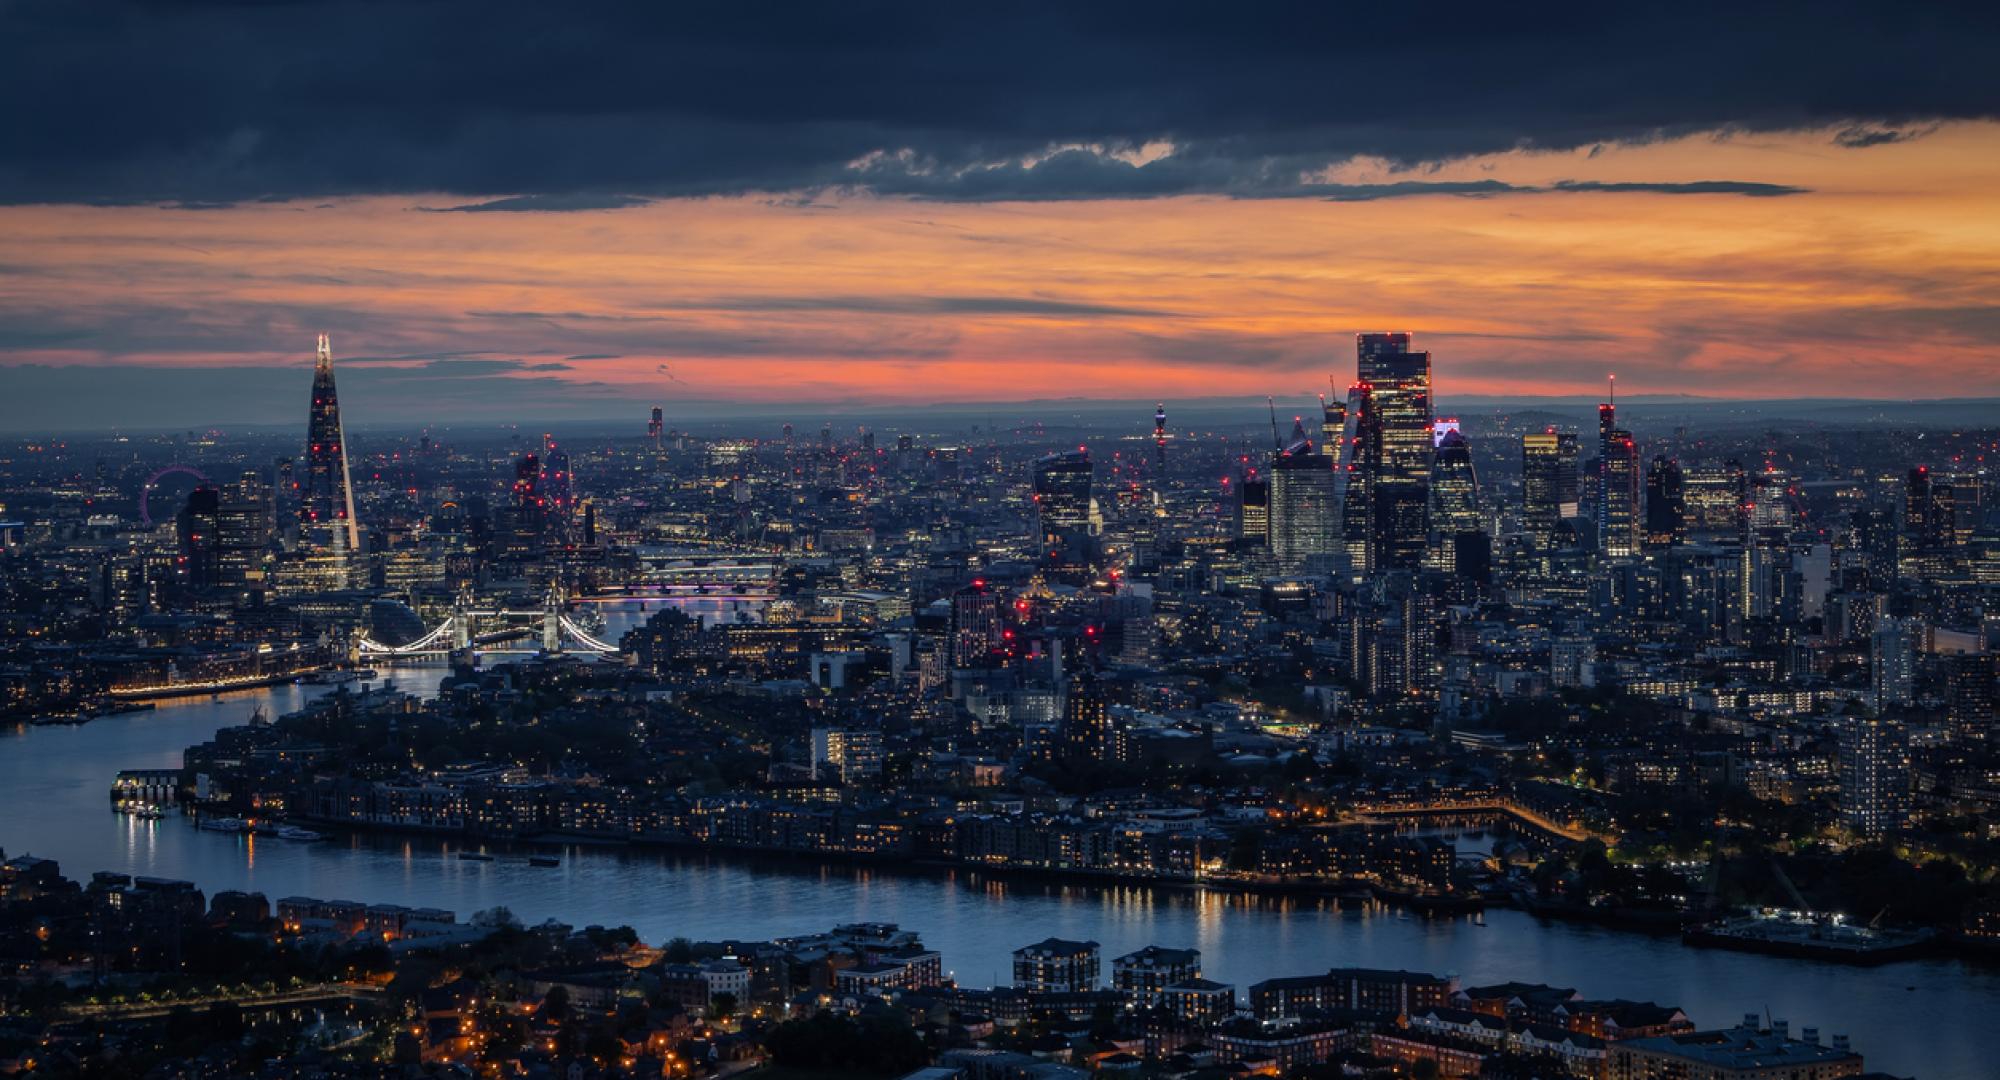 View of London at night